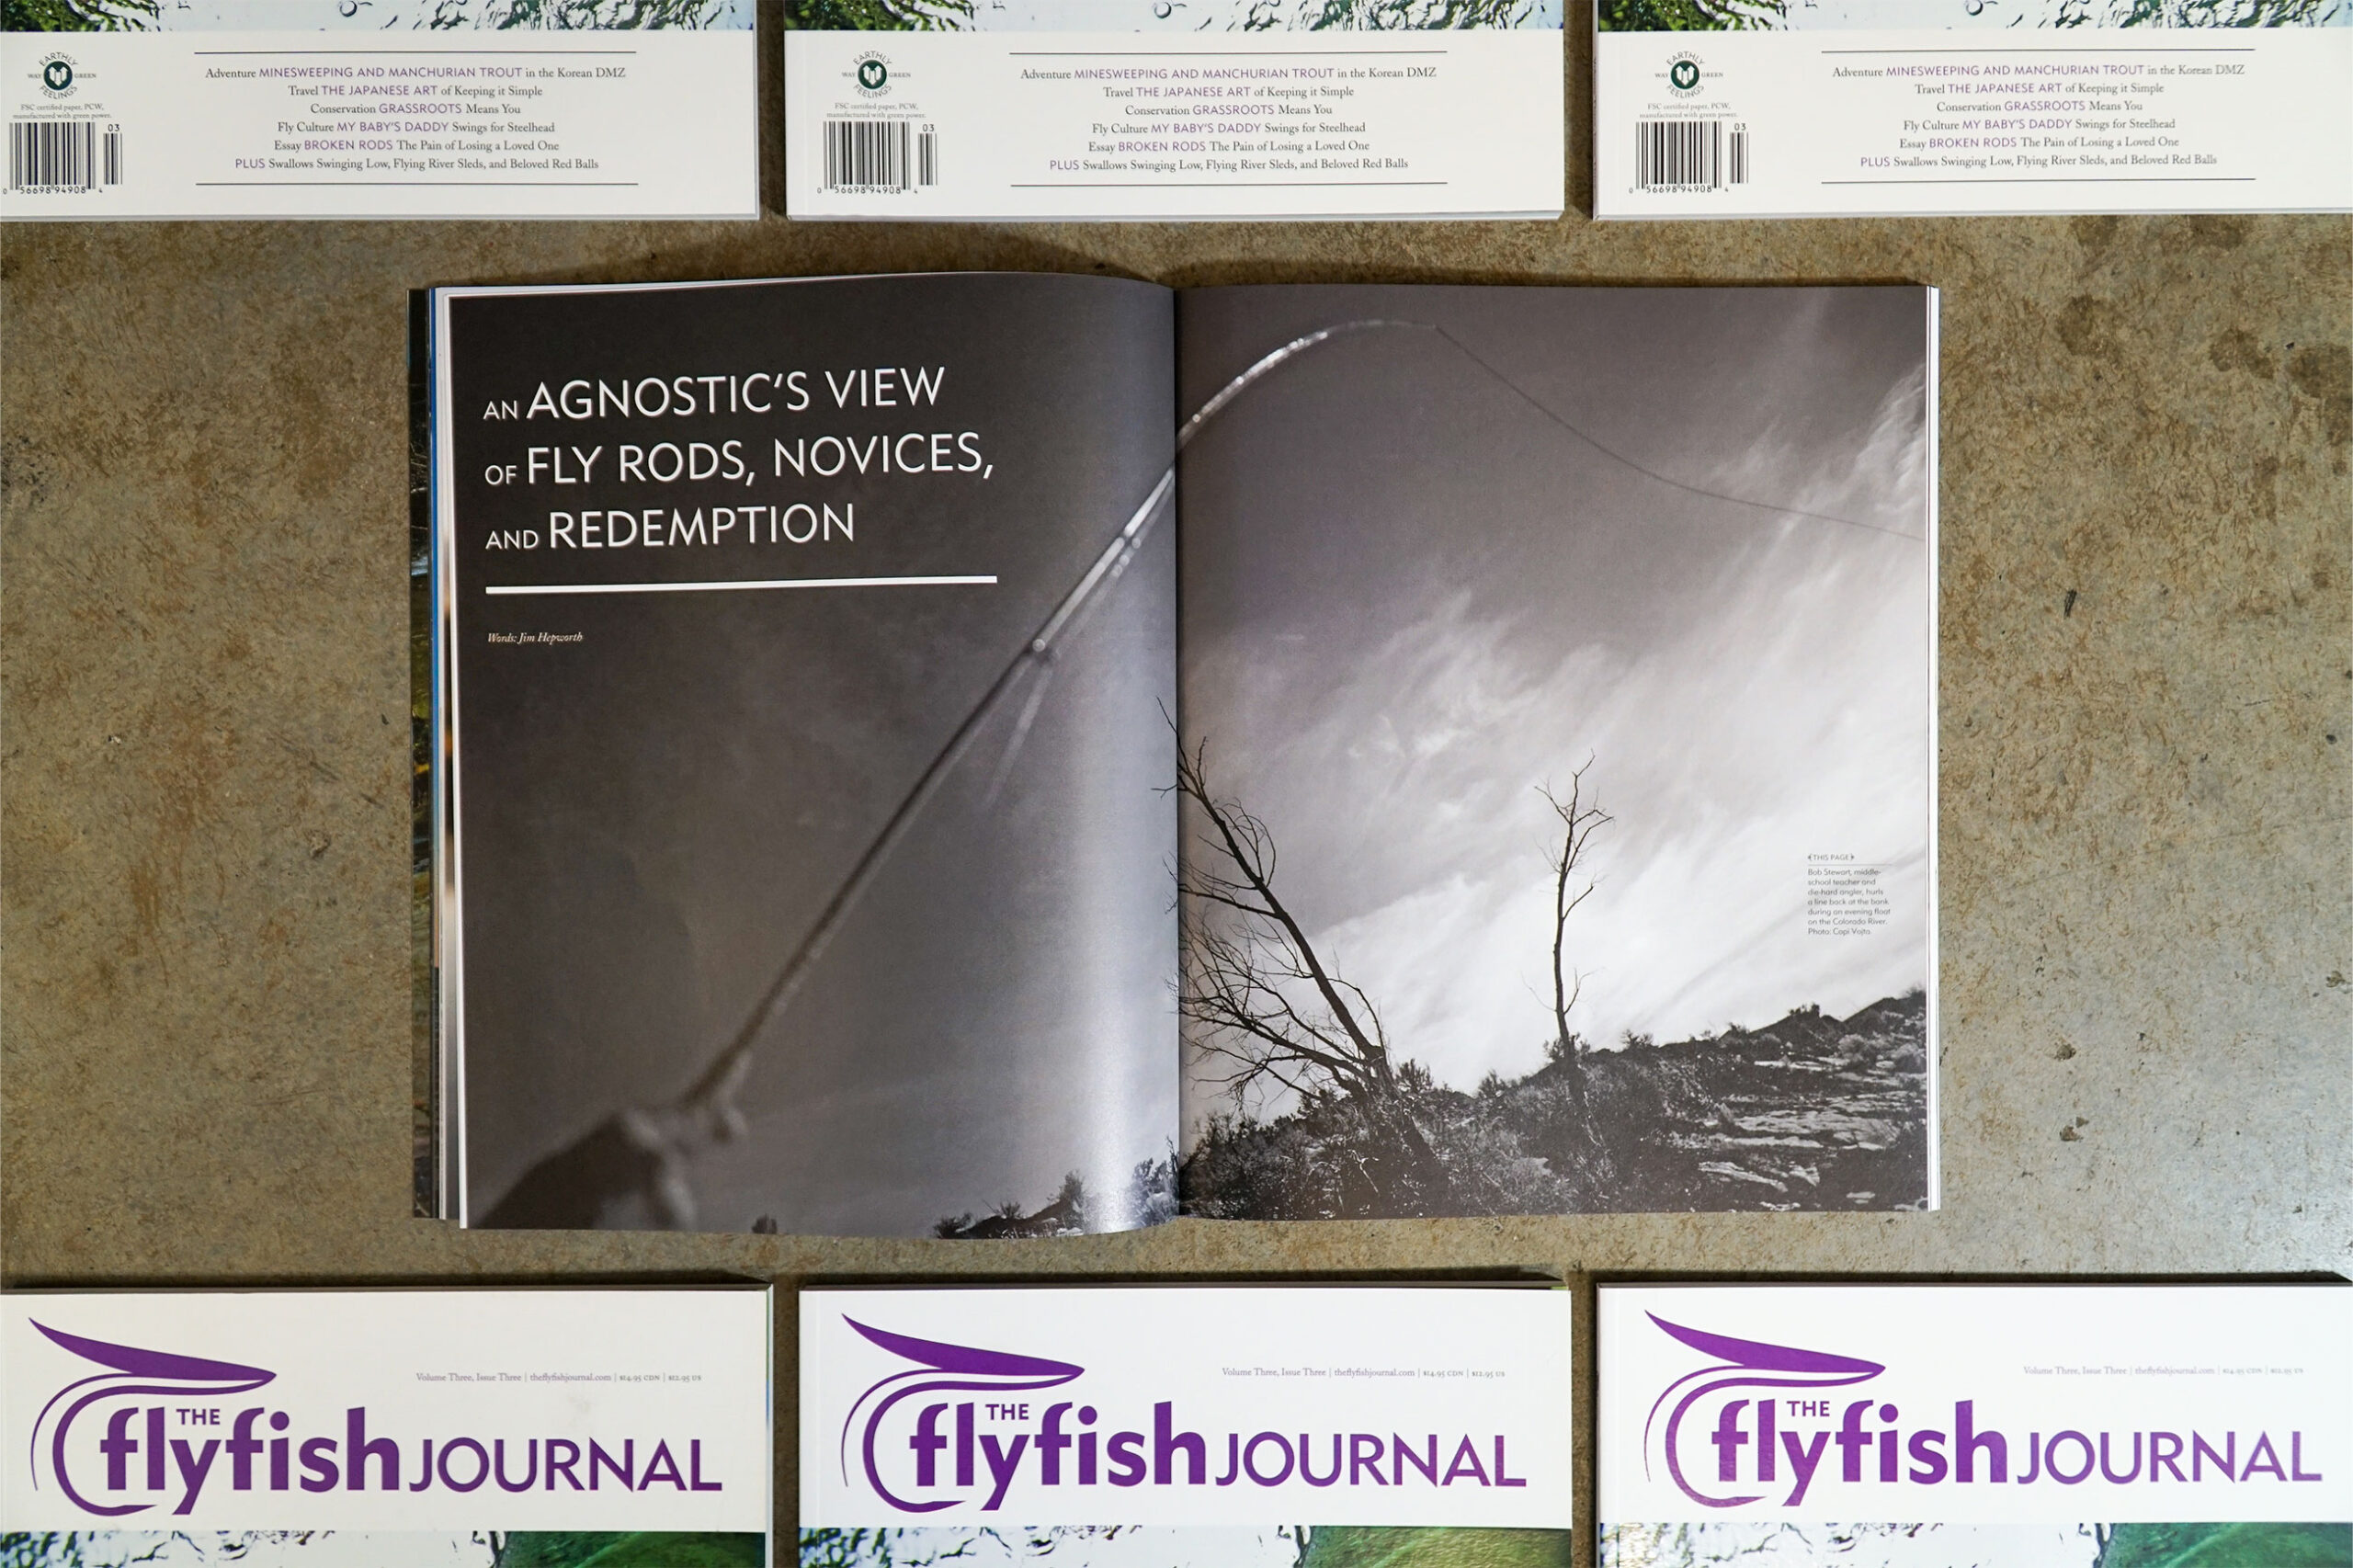 The Flyfish Journal Volume 3 Issue 3 Feature An Agnostic's View of Fly Rods, Novices, and Redemption